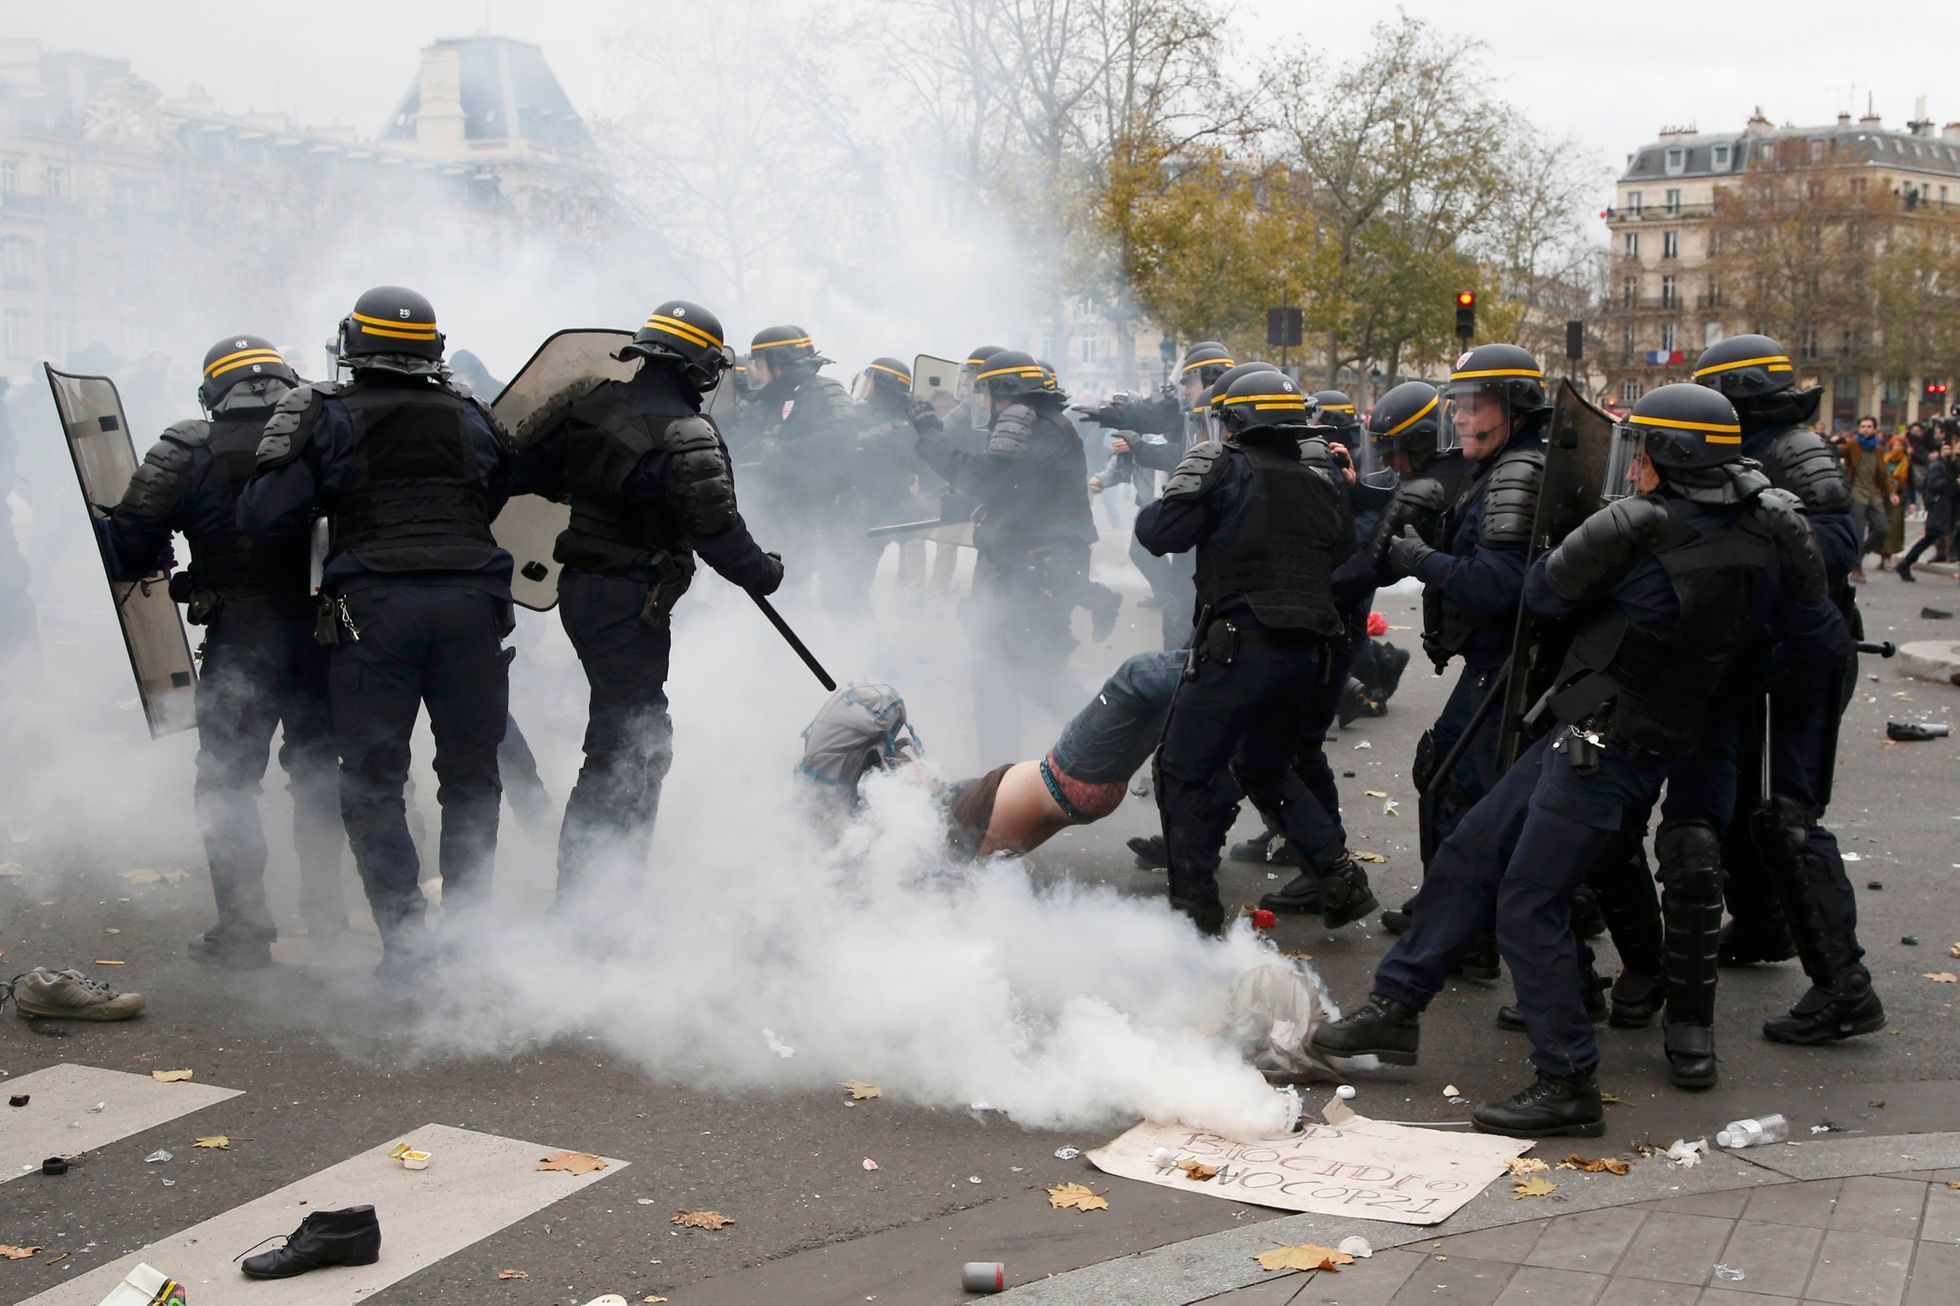 French CRS riot police apprehend a demonstrator during clashes near the Place de la Republique after the cancellation of a planned climate march  ahead of the World Climate Change Conference 2015 in P